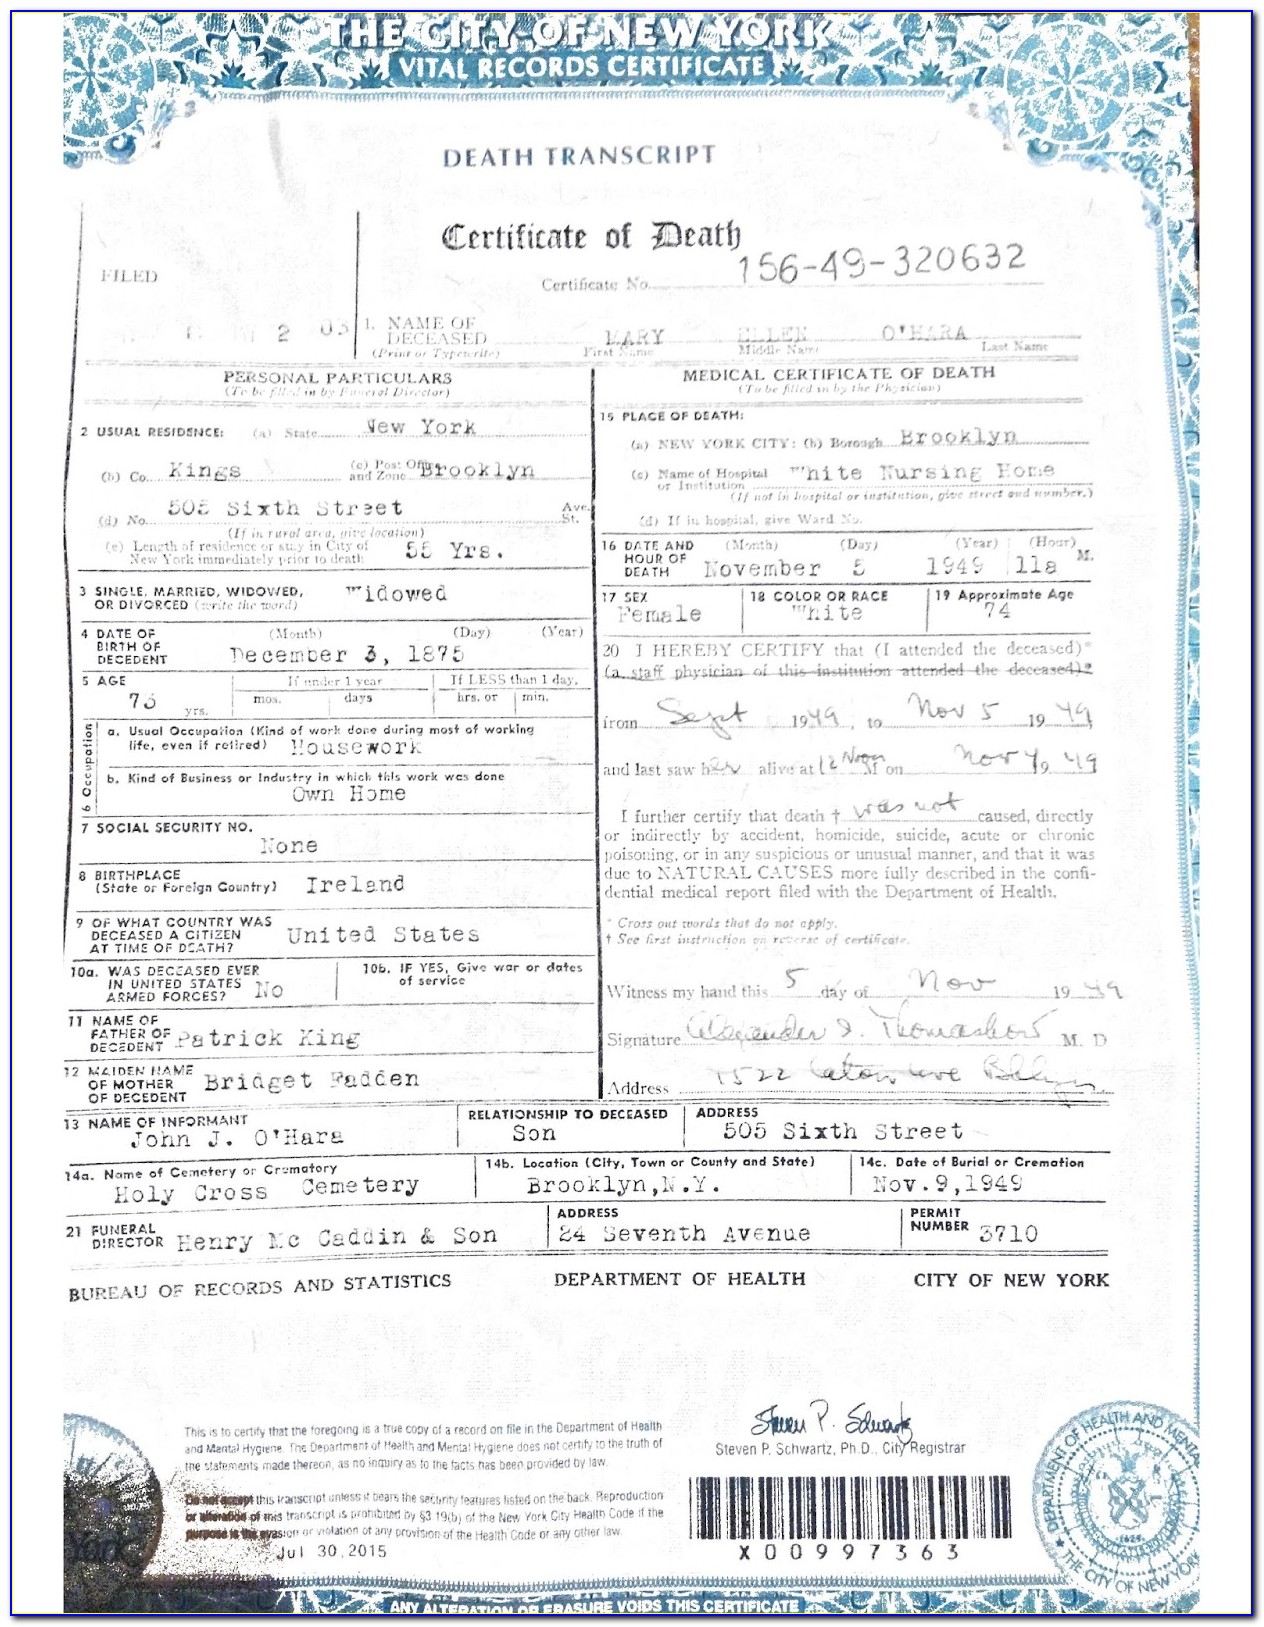 New York City Death Certificate Records